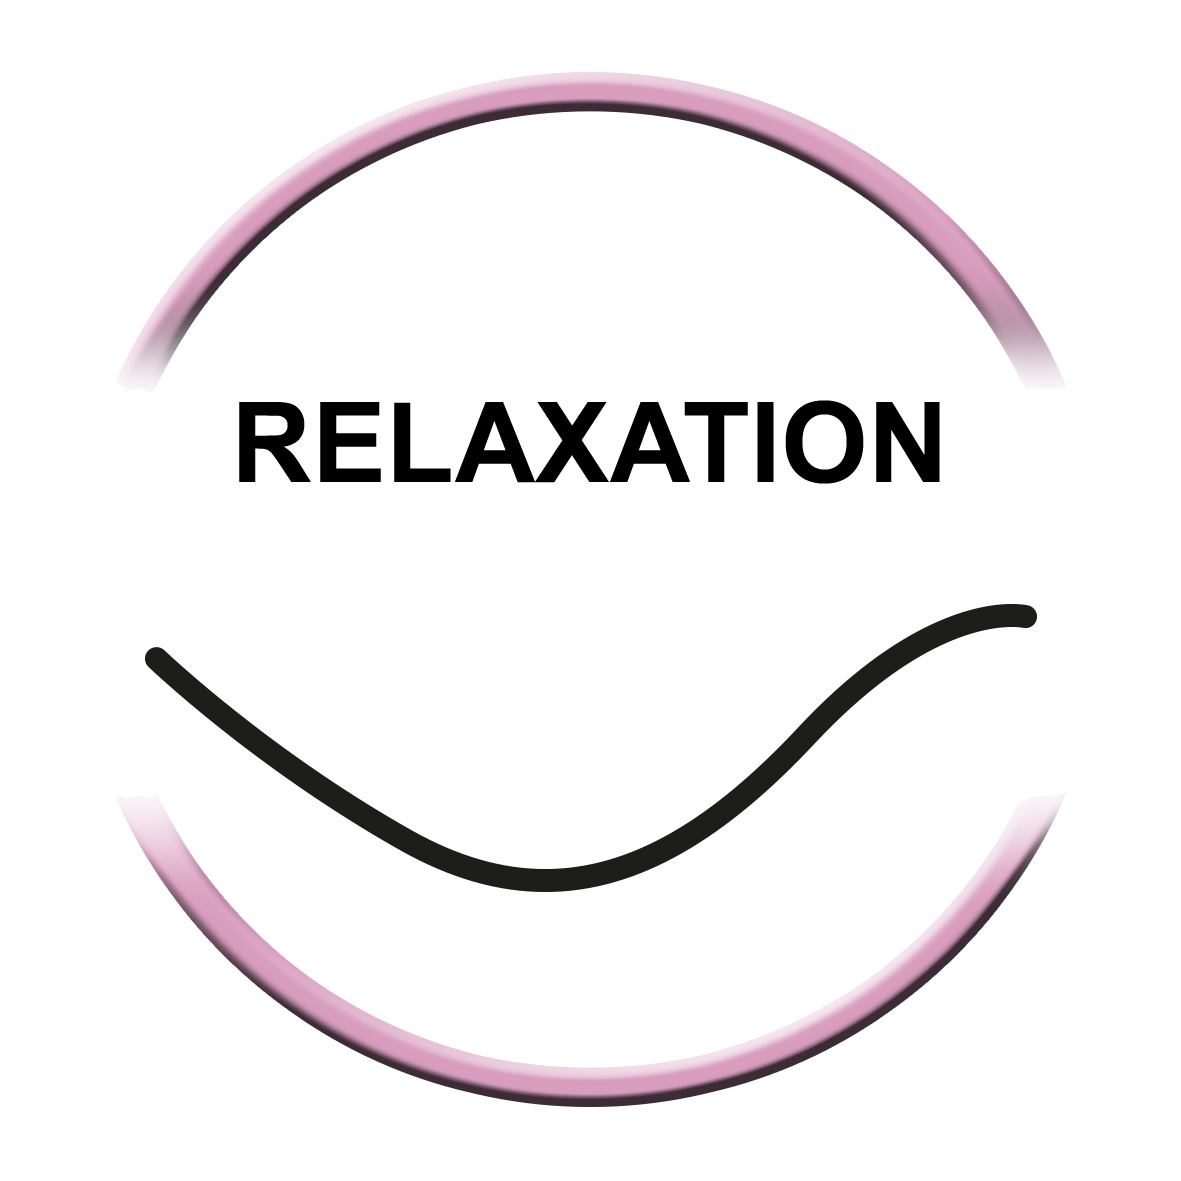 Picto relaxation f hd